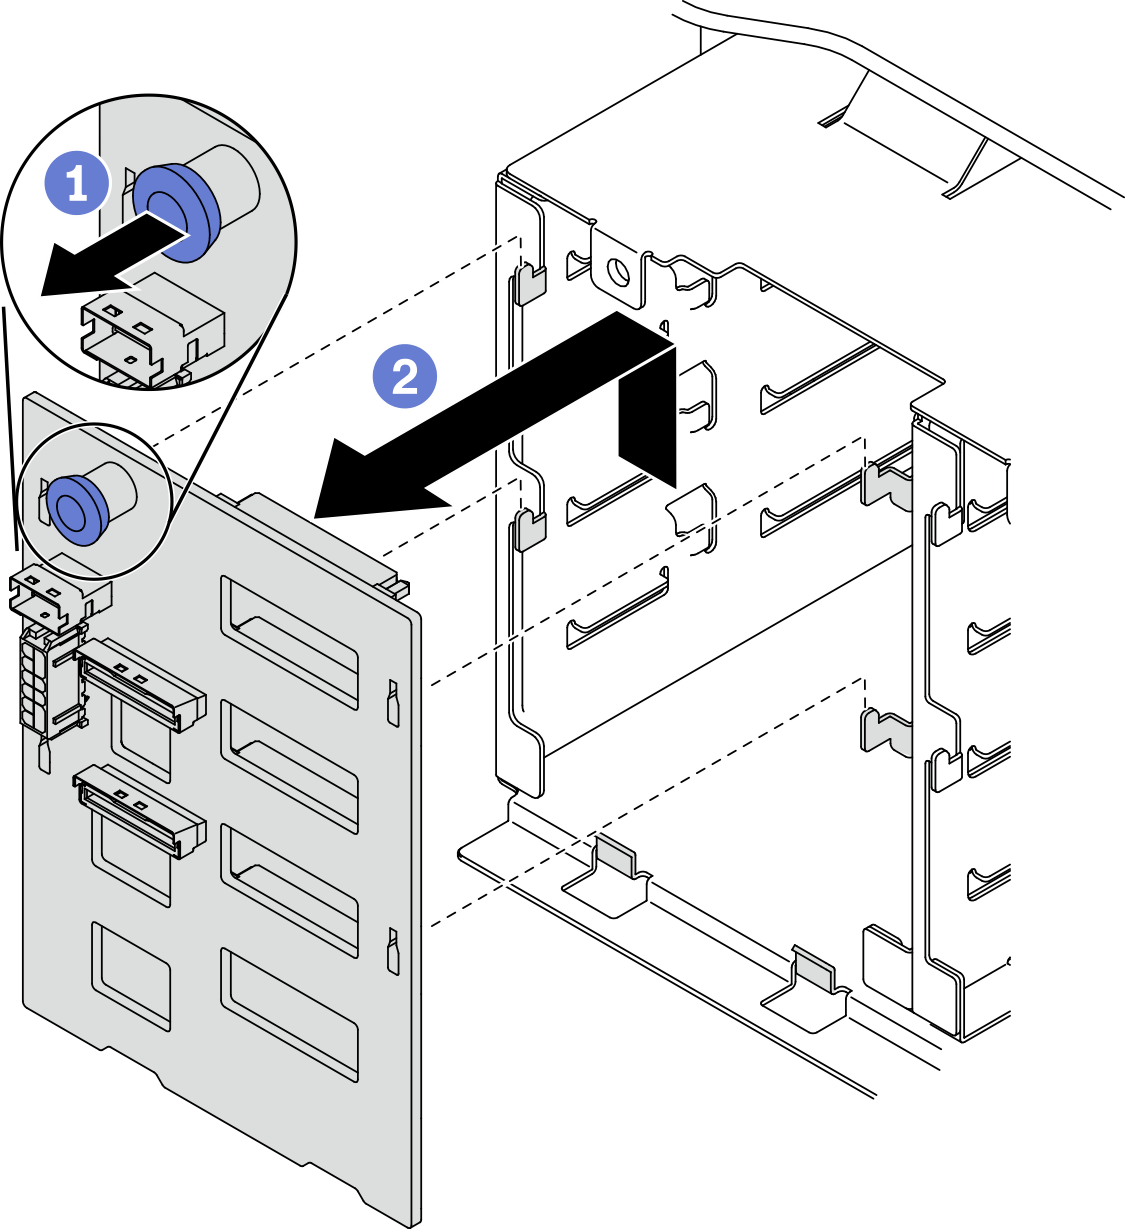 Removal of the 3.5-inch hot-swap drive backplane